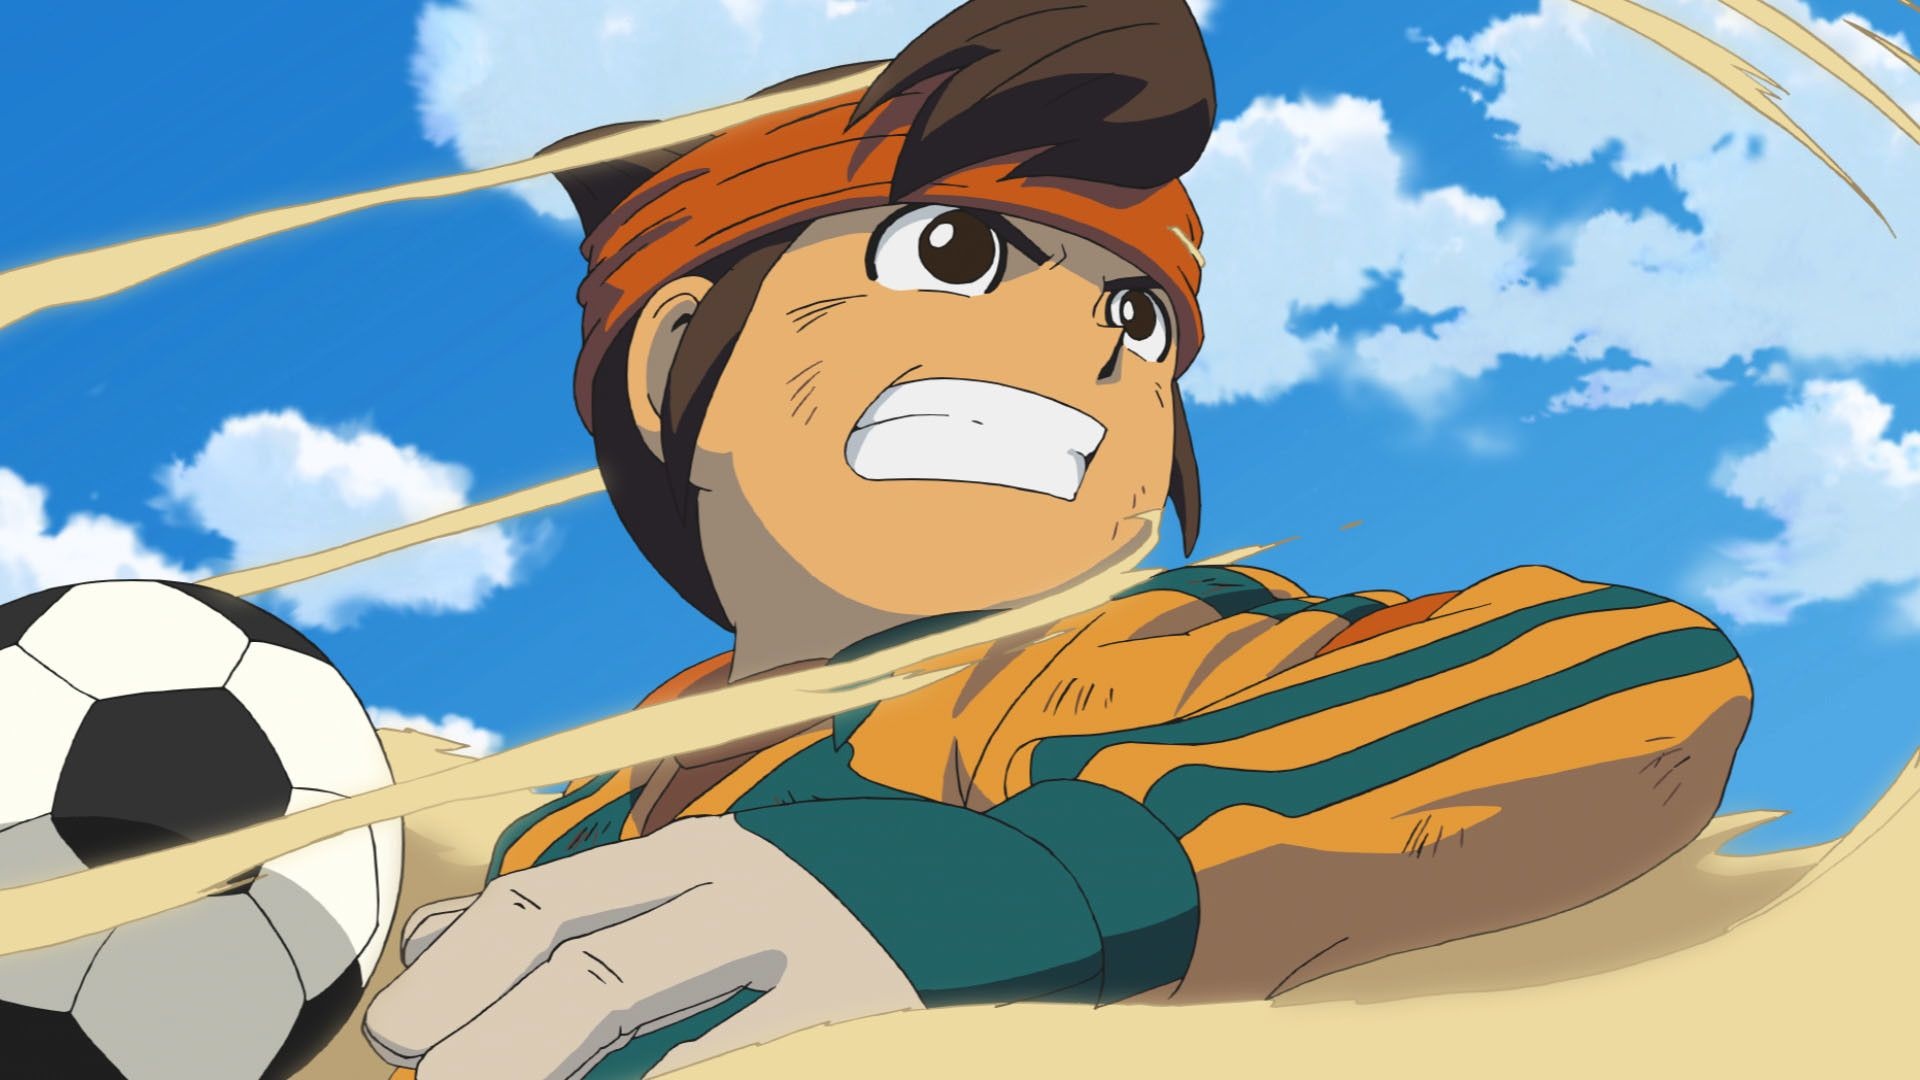 Mark Evans, Inazuma Eleven character, Protagonist, Passionate soccer player, 1920x1080 Full HD Desktop